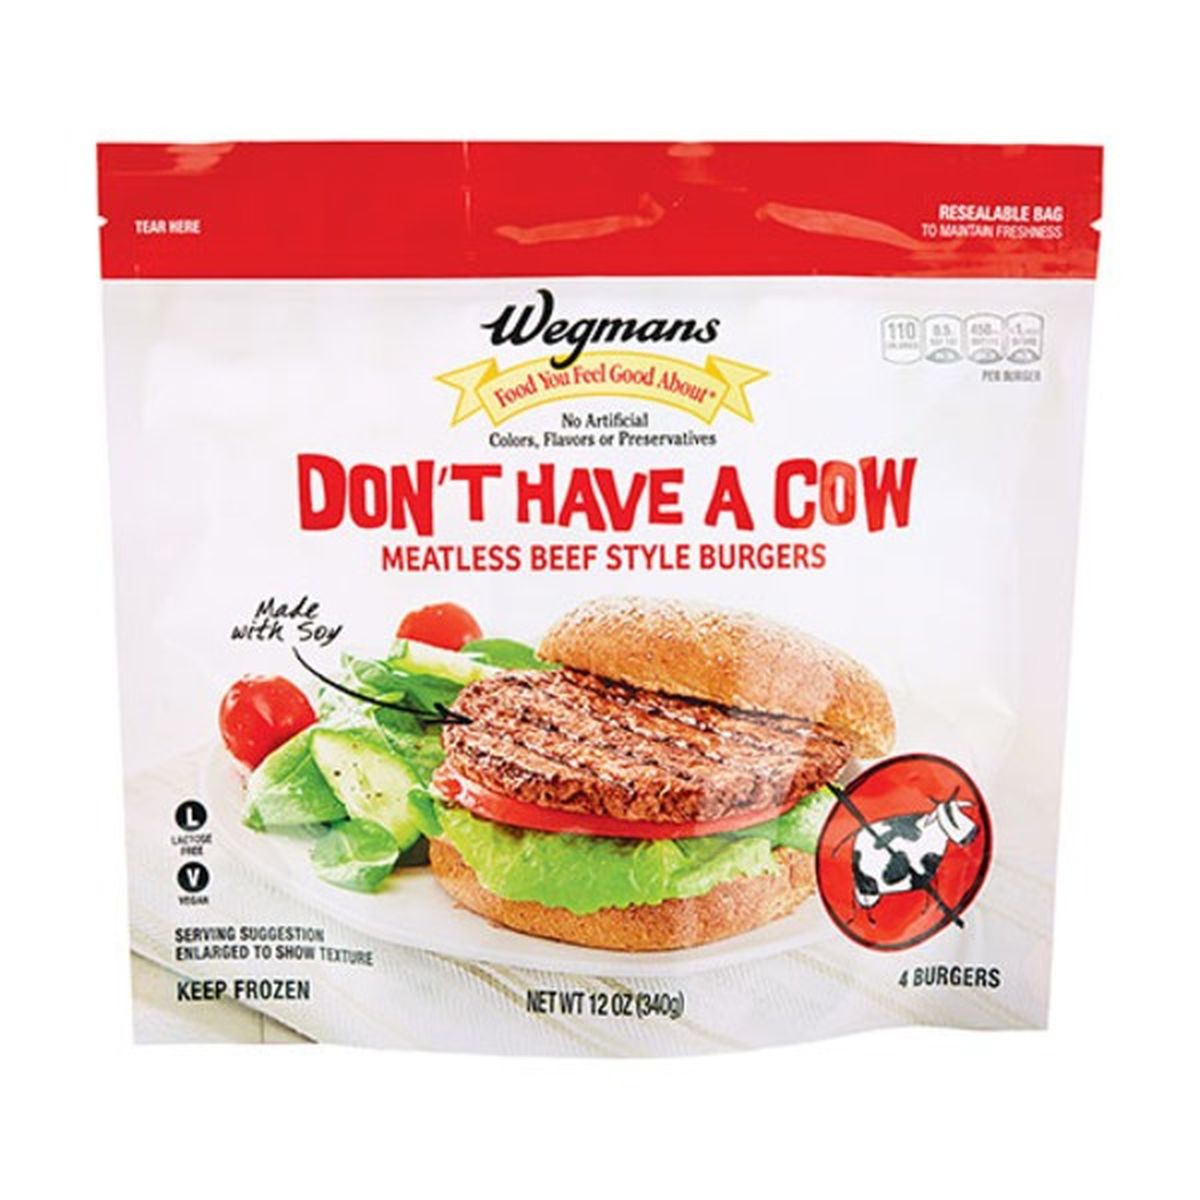 Calories in Wegmans Don't Have a Cow Meatless Beef Style Burgers